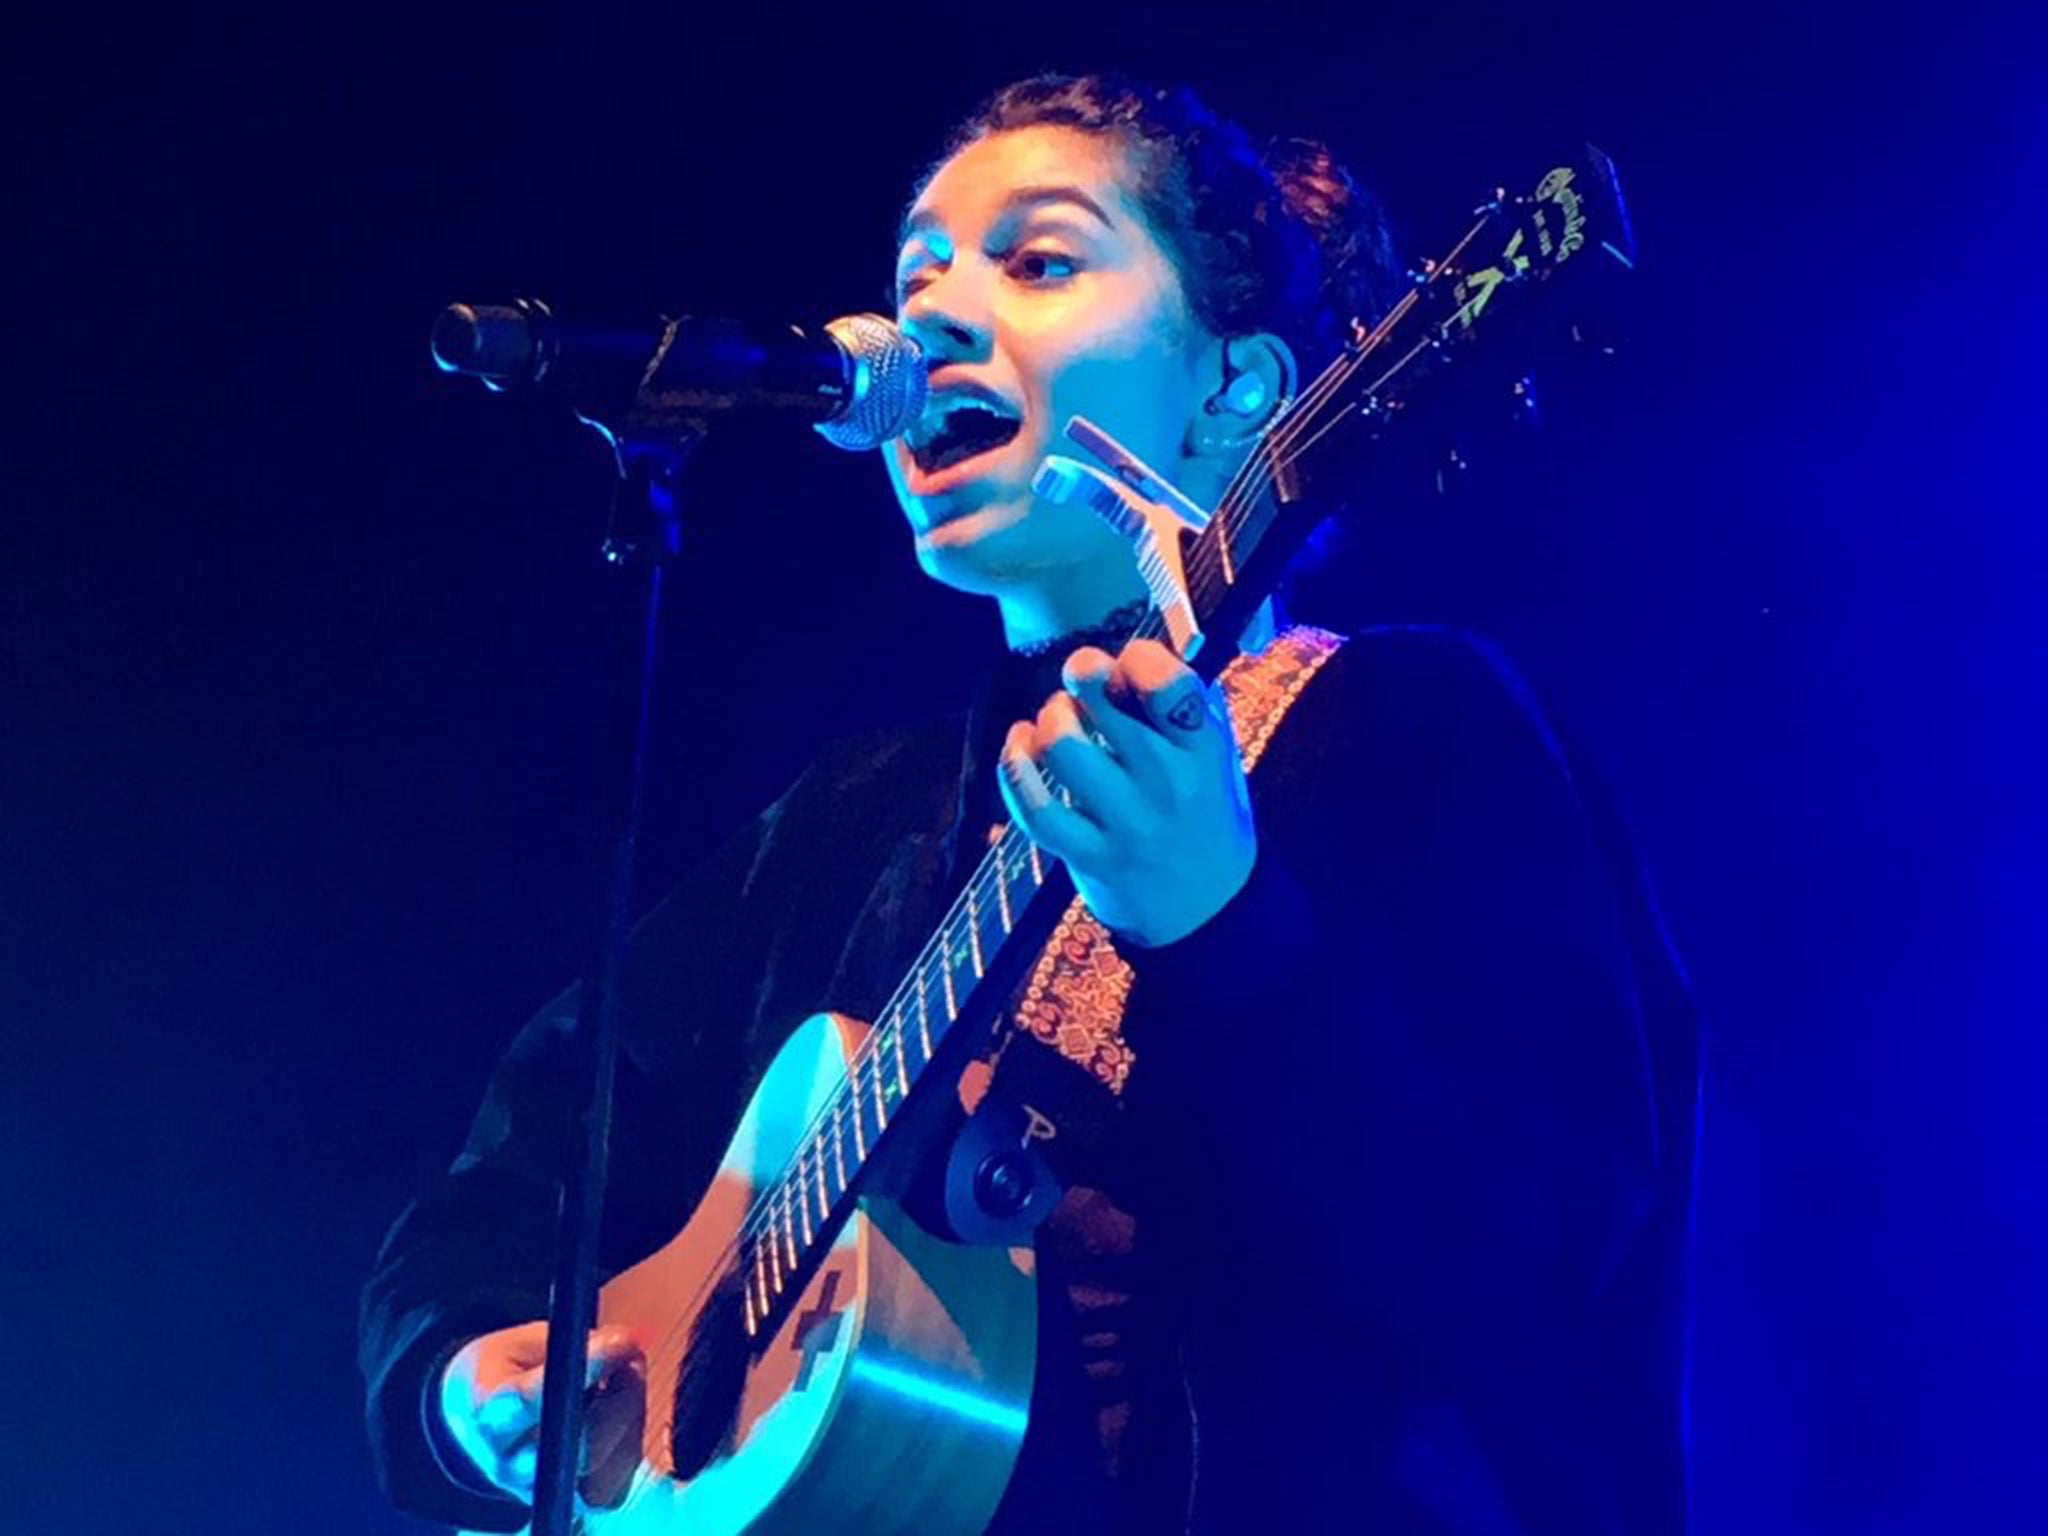 Alessia Cara, runner-up in the BBC's Sound of 2016, headlines the Electric Brixton